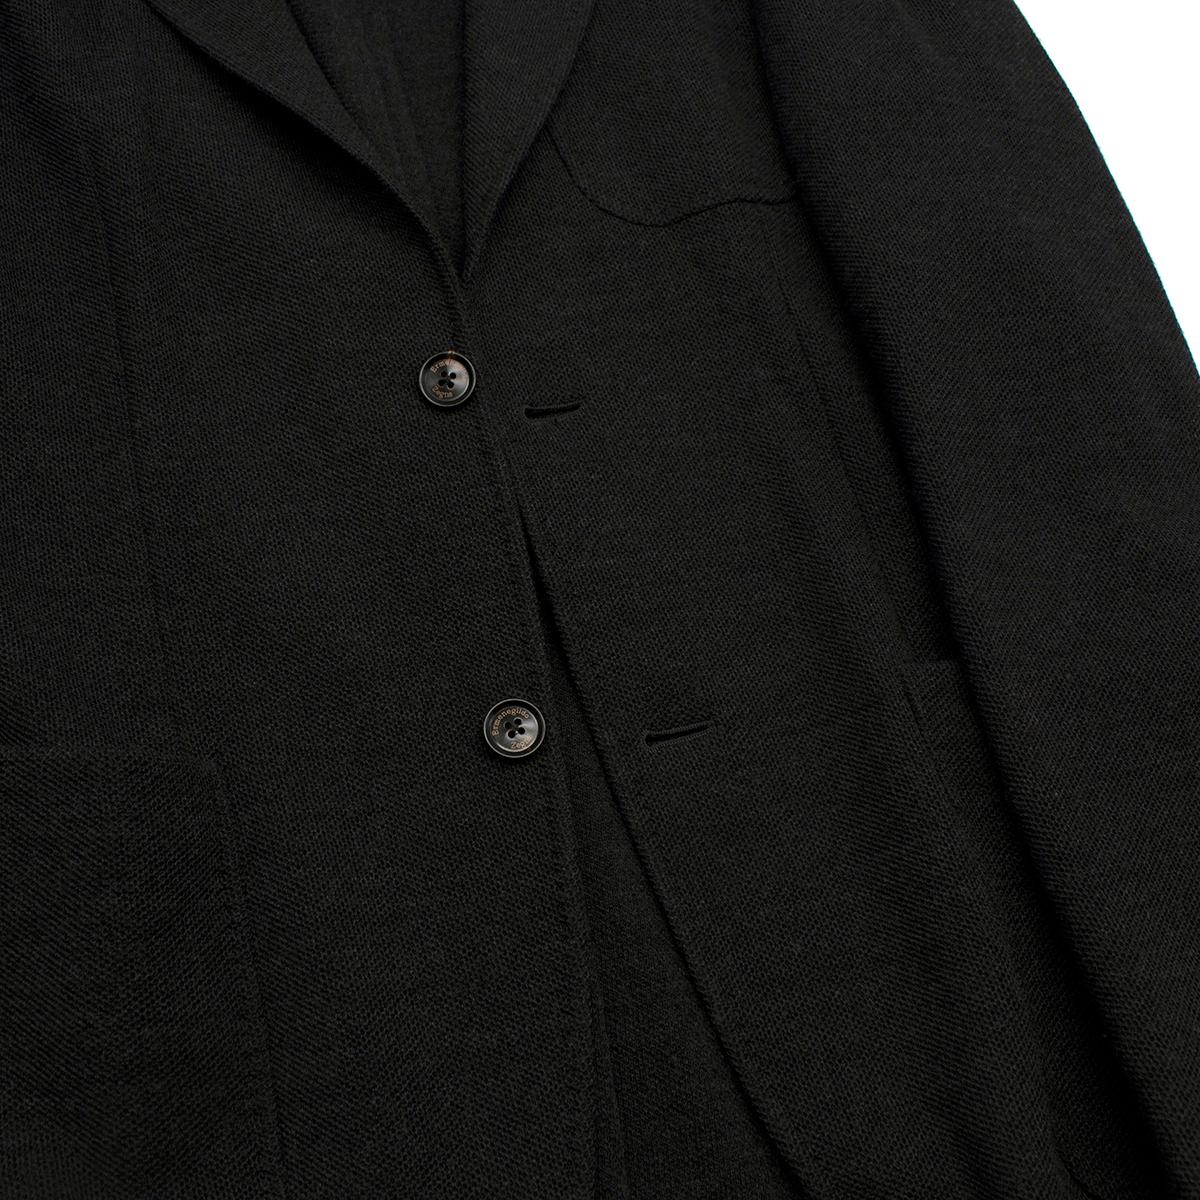 Ermenegildo Zegna Dark Grey Wool Single Breasted Jacket - Us size  In Excellent Condition For Sale In London, GB